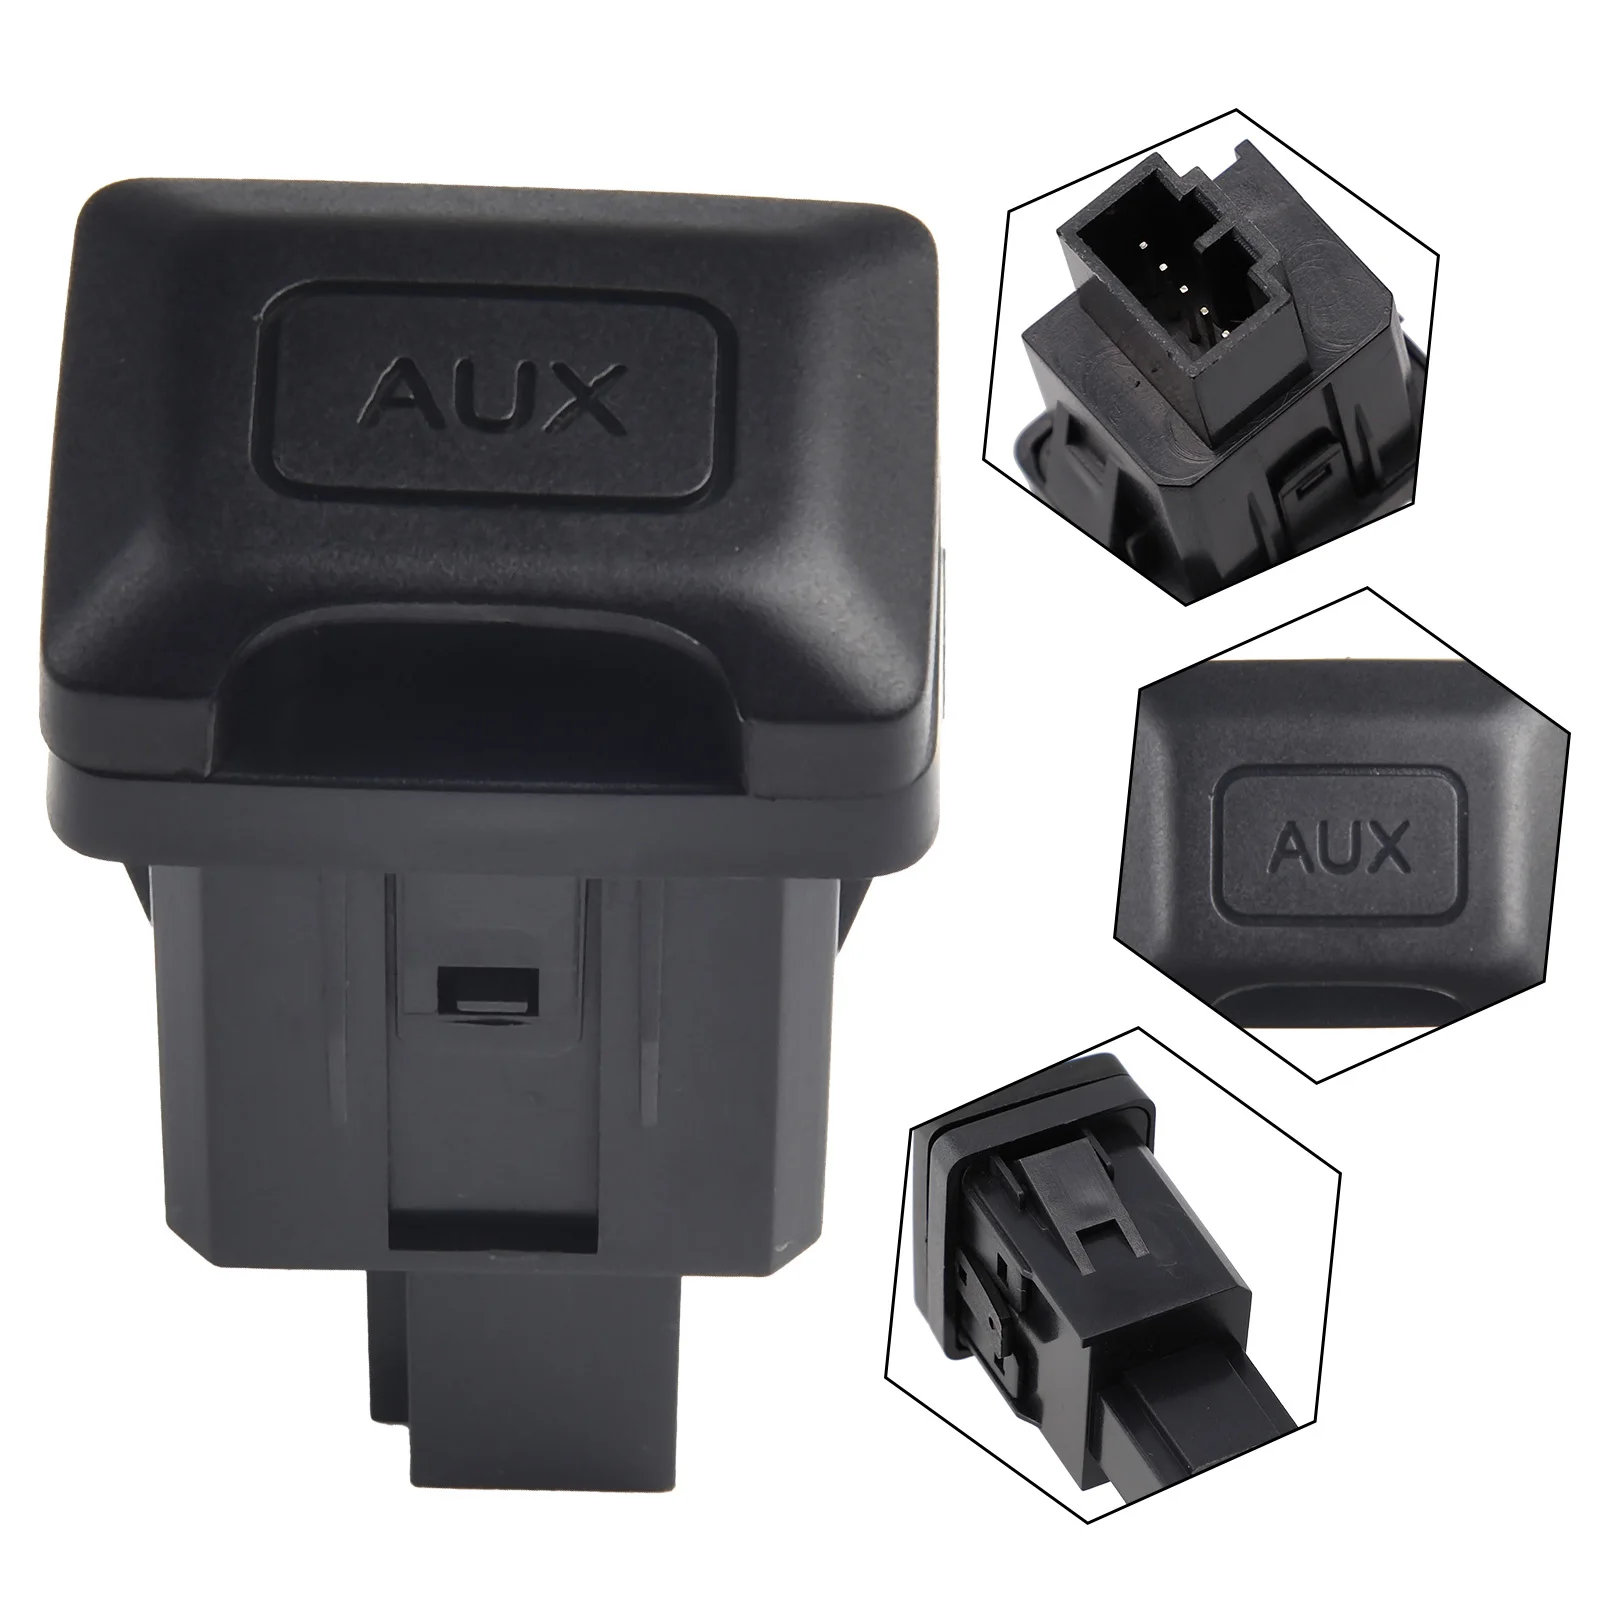 

1pc Black Aux Port Plug Adapter 5PIN Auxiliary Input For Honda For Civic For CRV 2006-2011 #39112-SNA-A01 Plastic